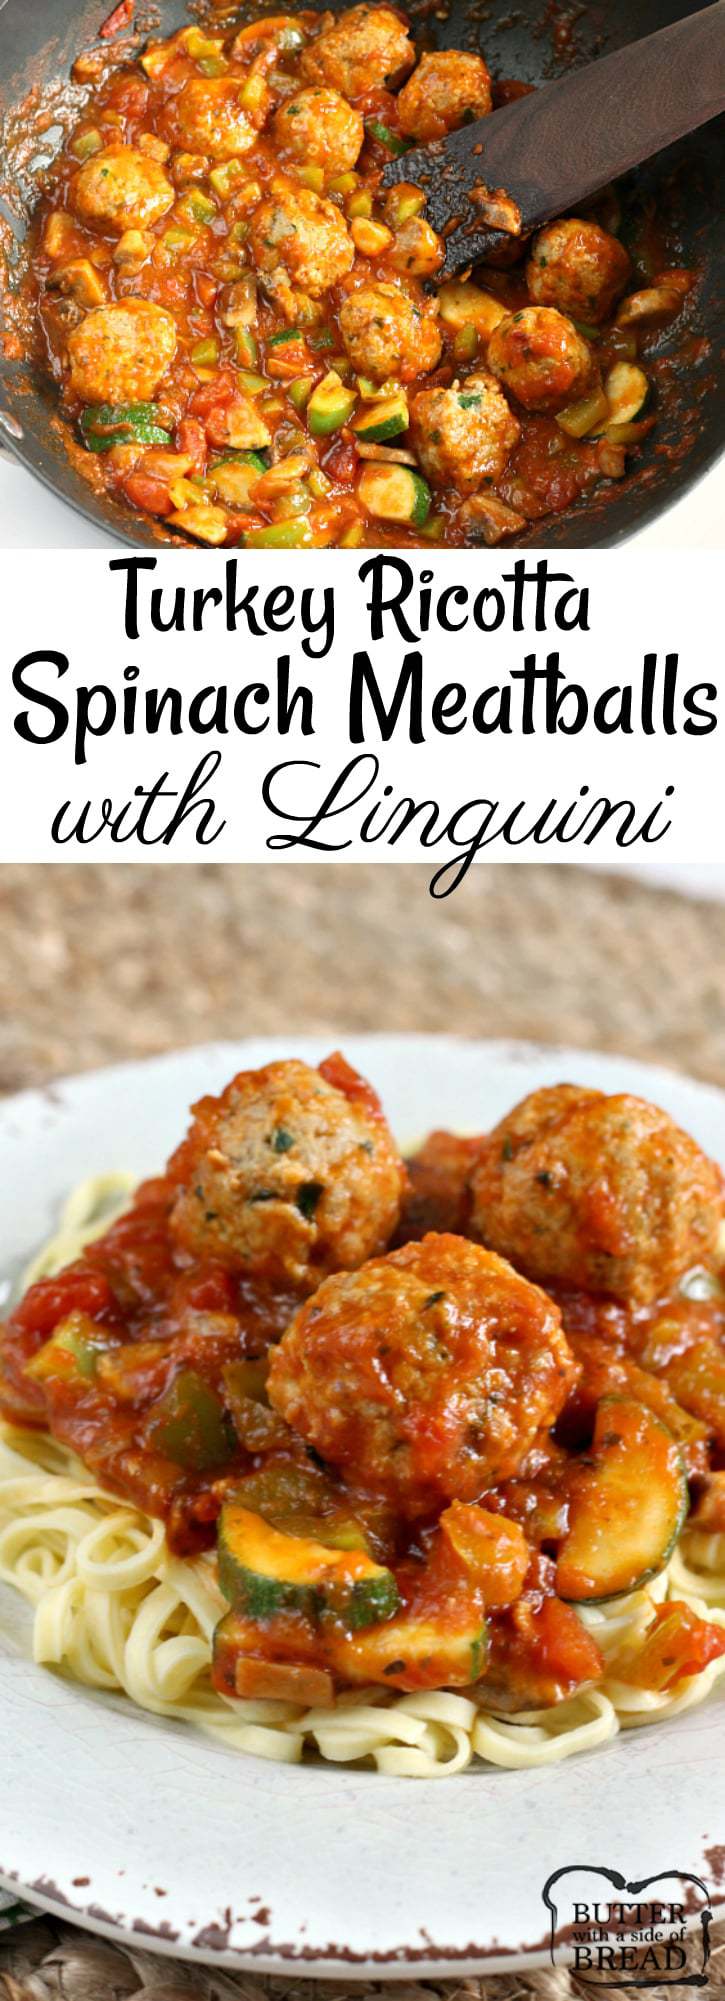 Turkey Ricotta Spinach Meatballs are so easy to make -add some marinara sauce and vegetables and serve over pasta for a deliciously well-balanced meal!